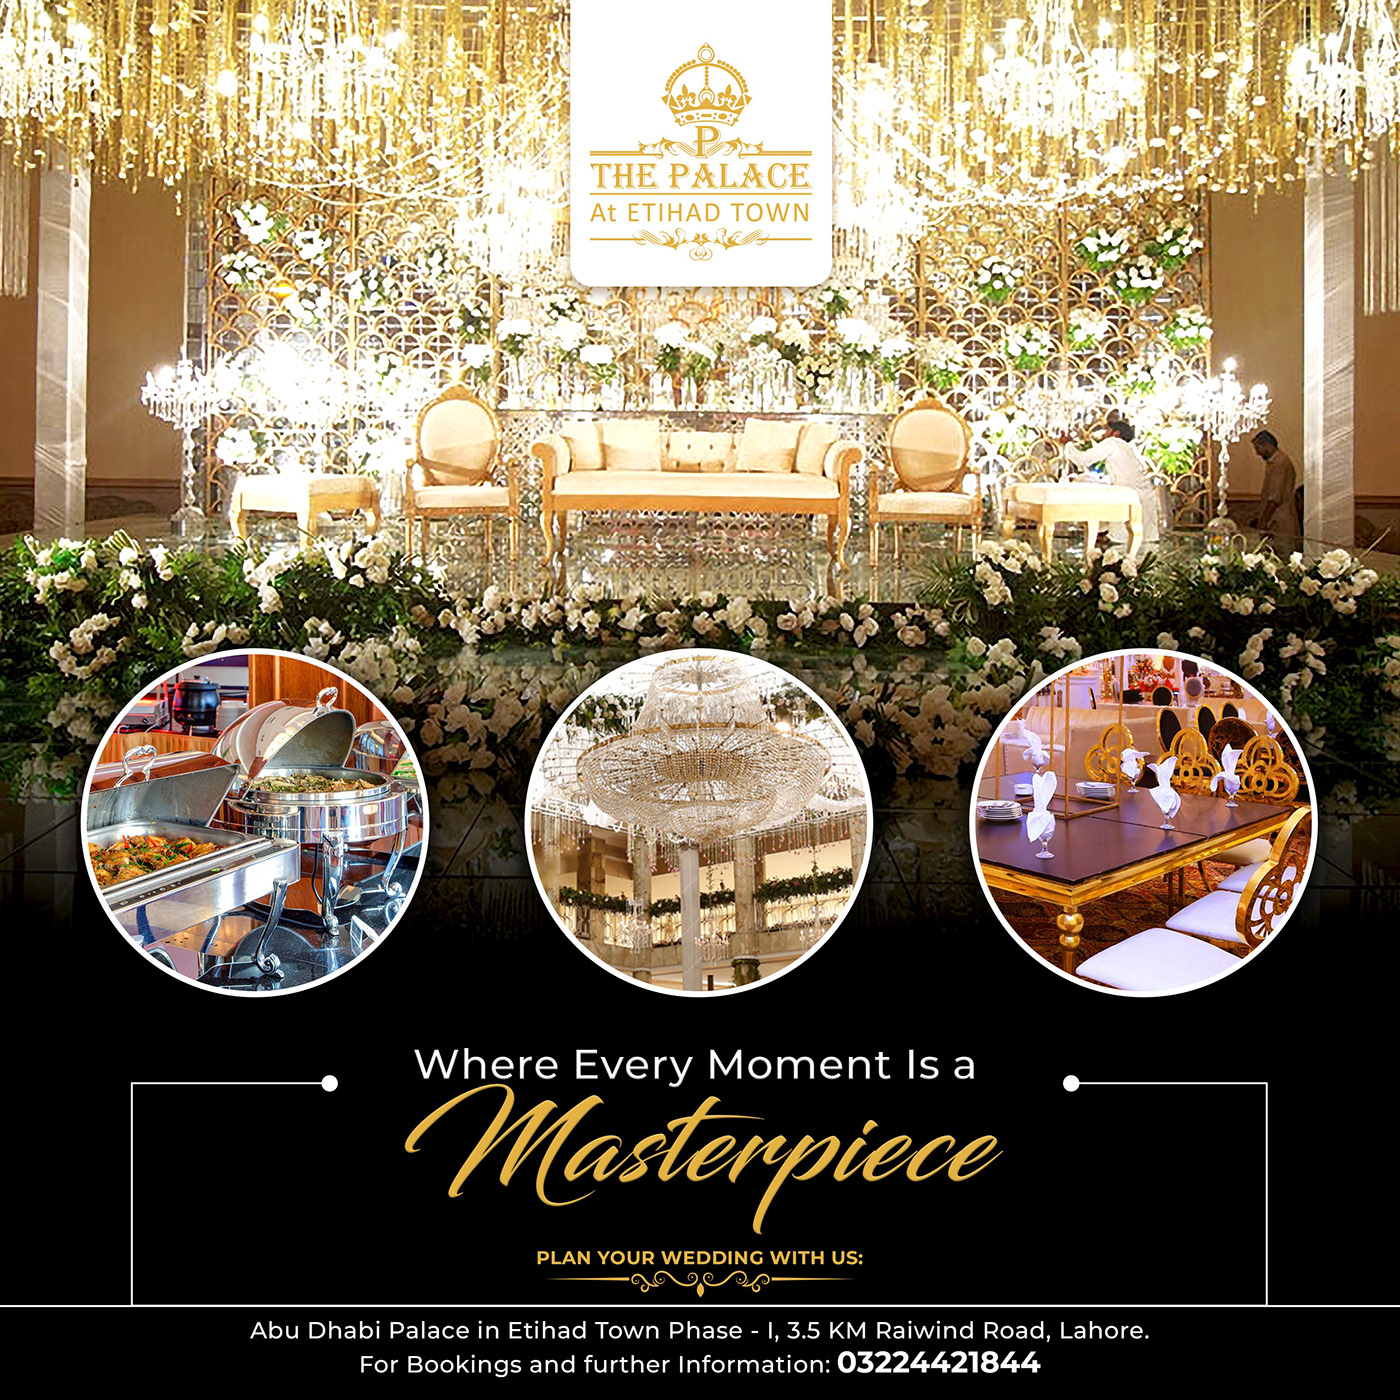 wedding Wedding hall benquet hall etihad town lahore post for wedding hall The Palace the palace hotel